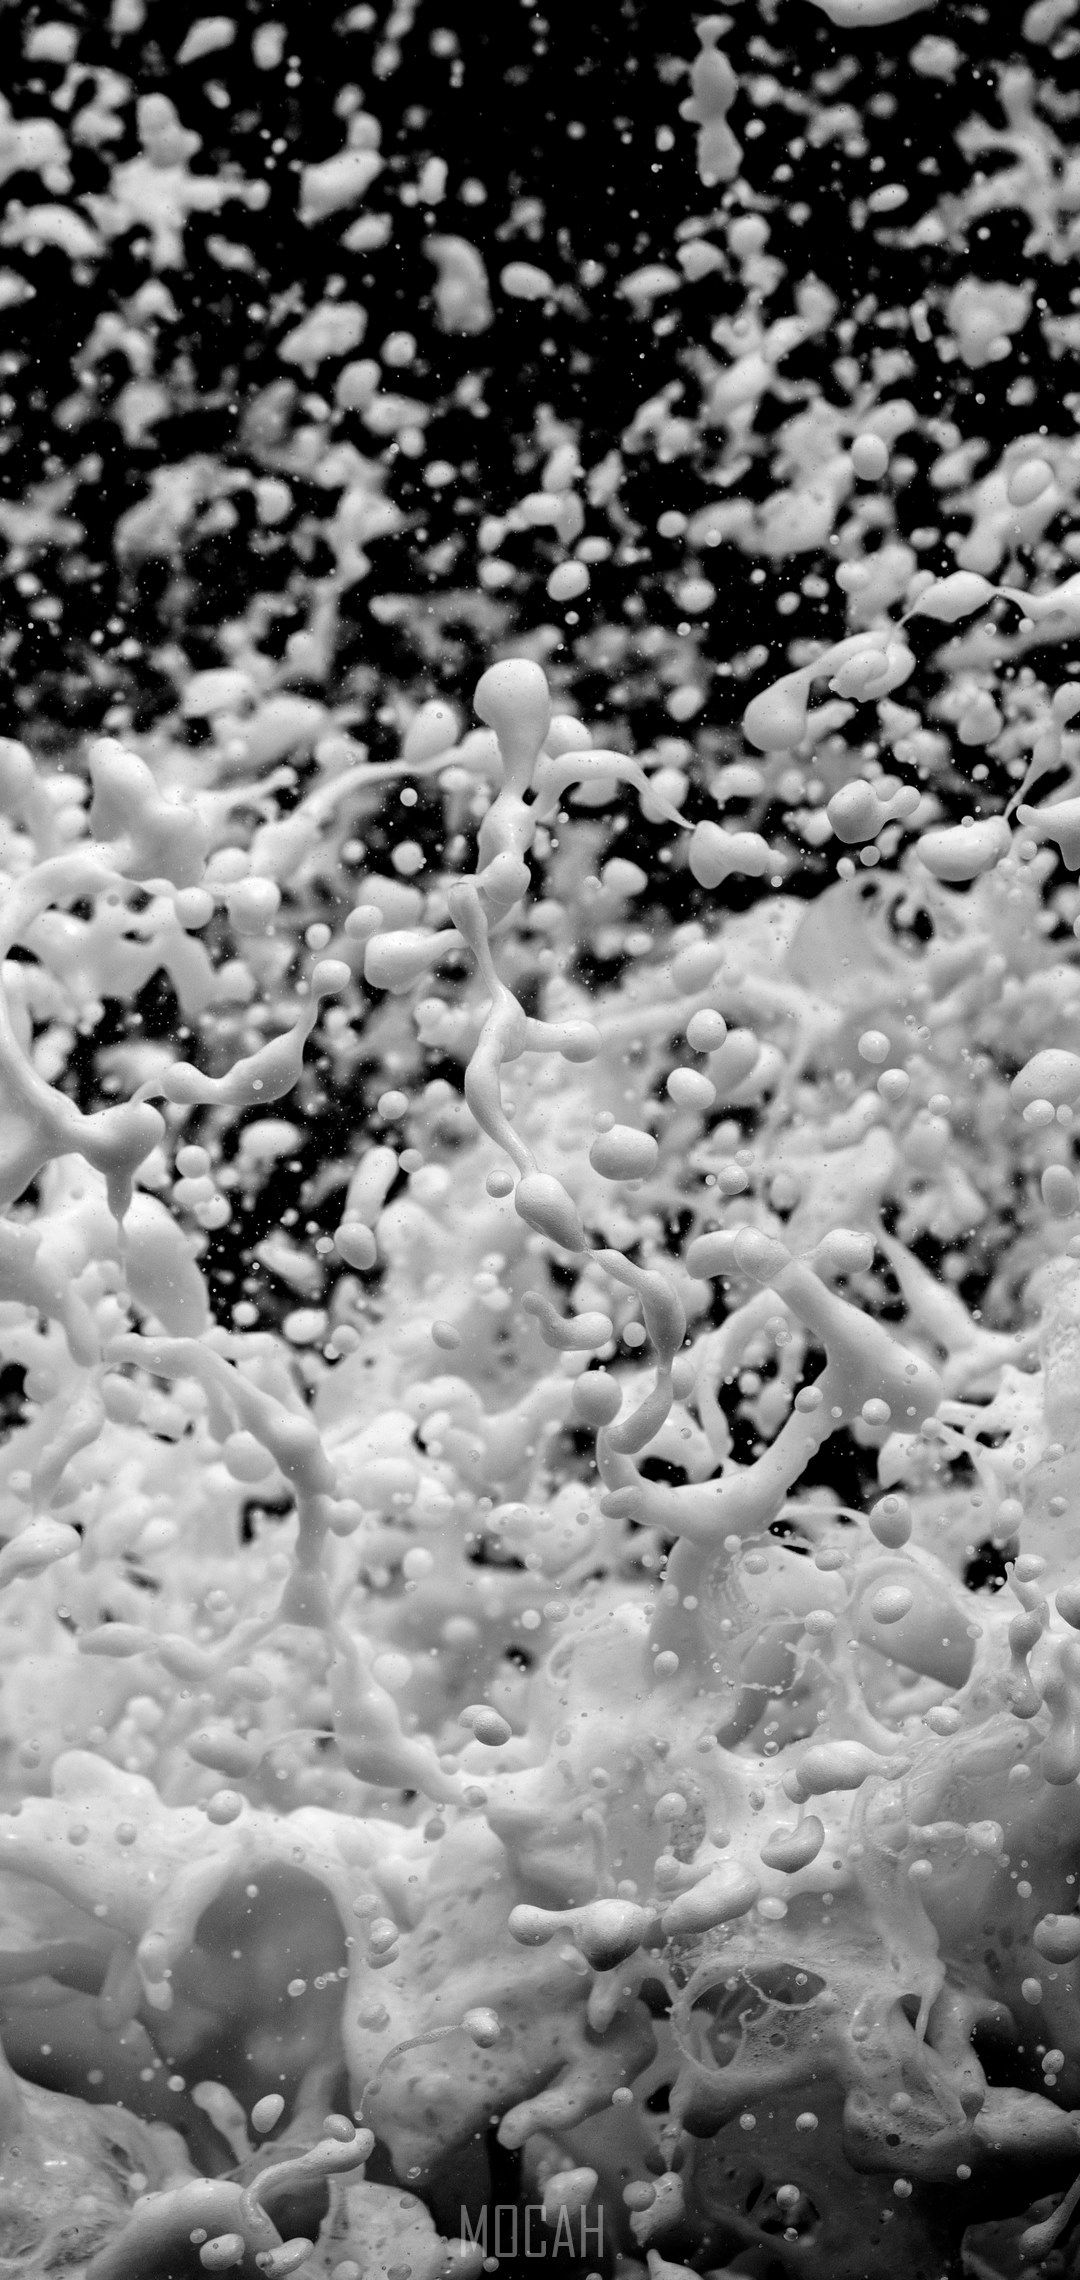 A black and white photo of water splashing - Wave